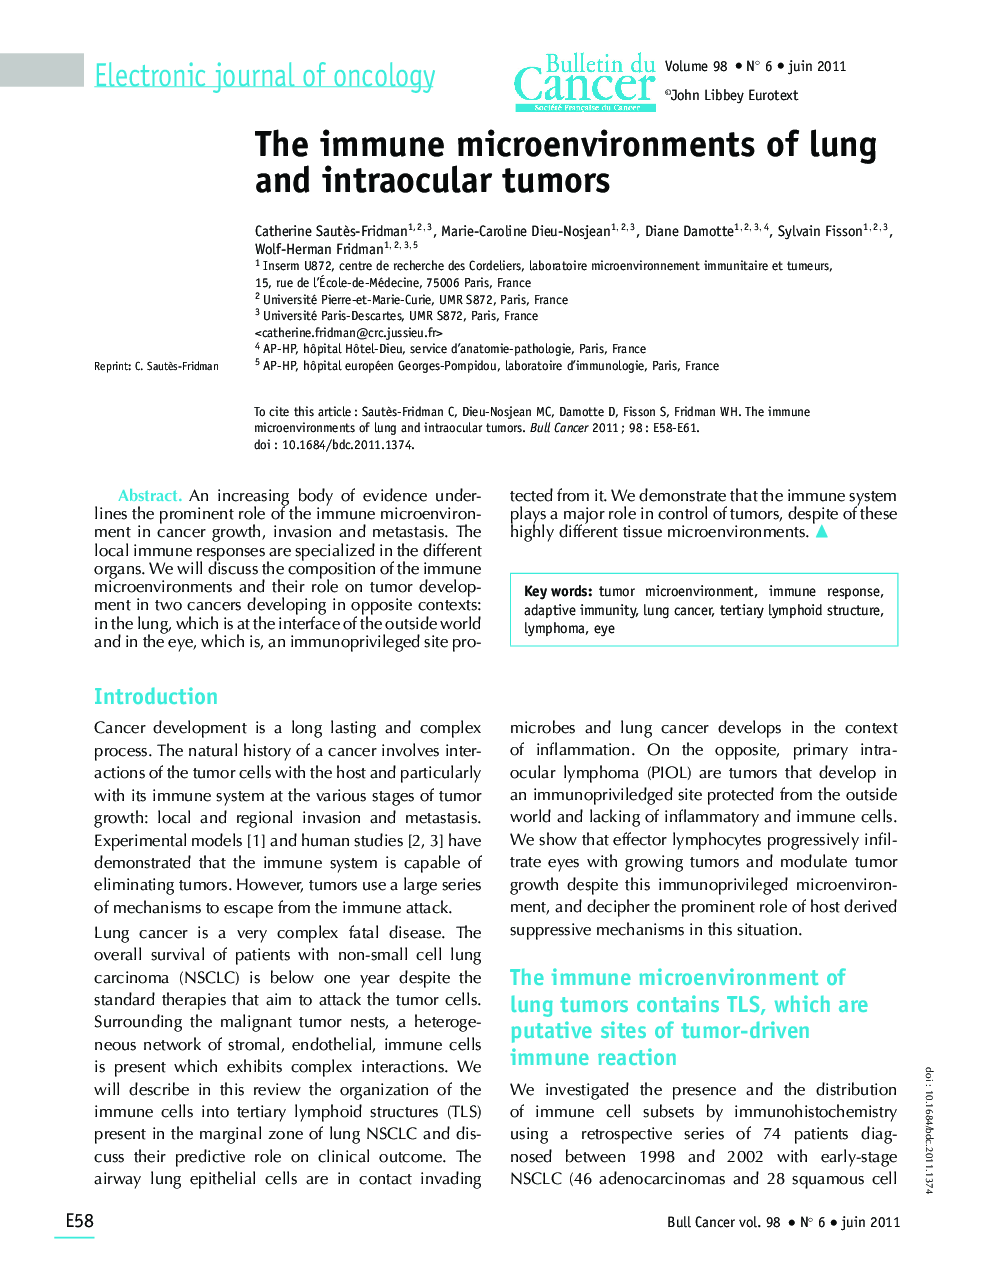 The immune microenvironments of lung and intraocular tumors